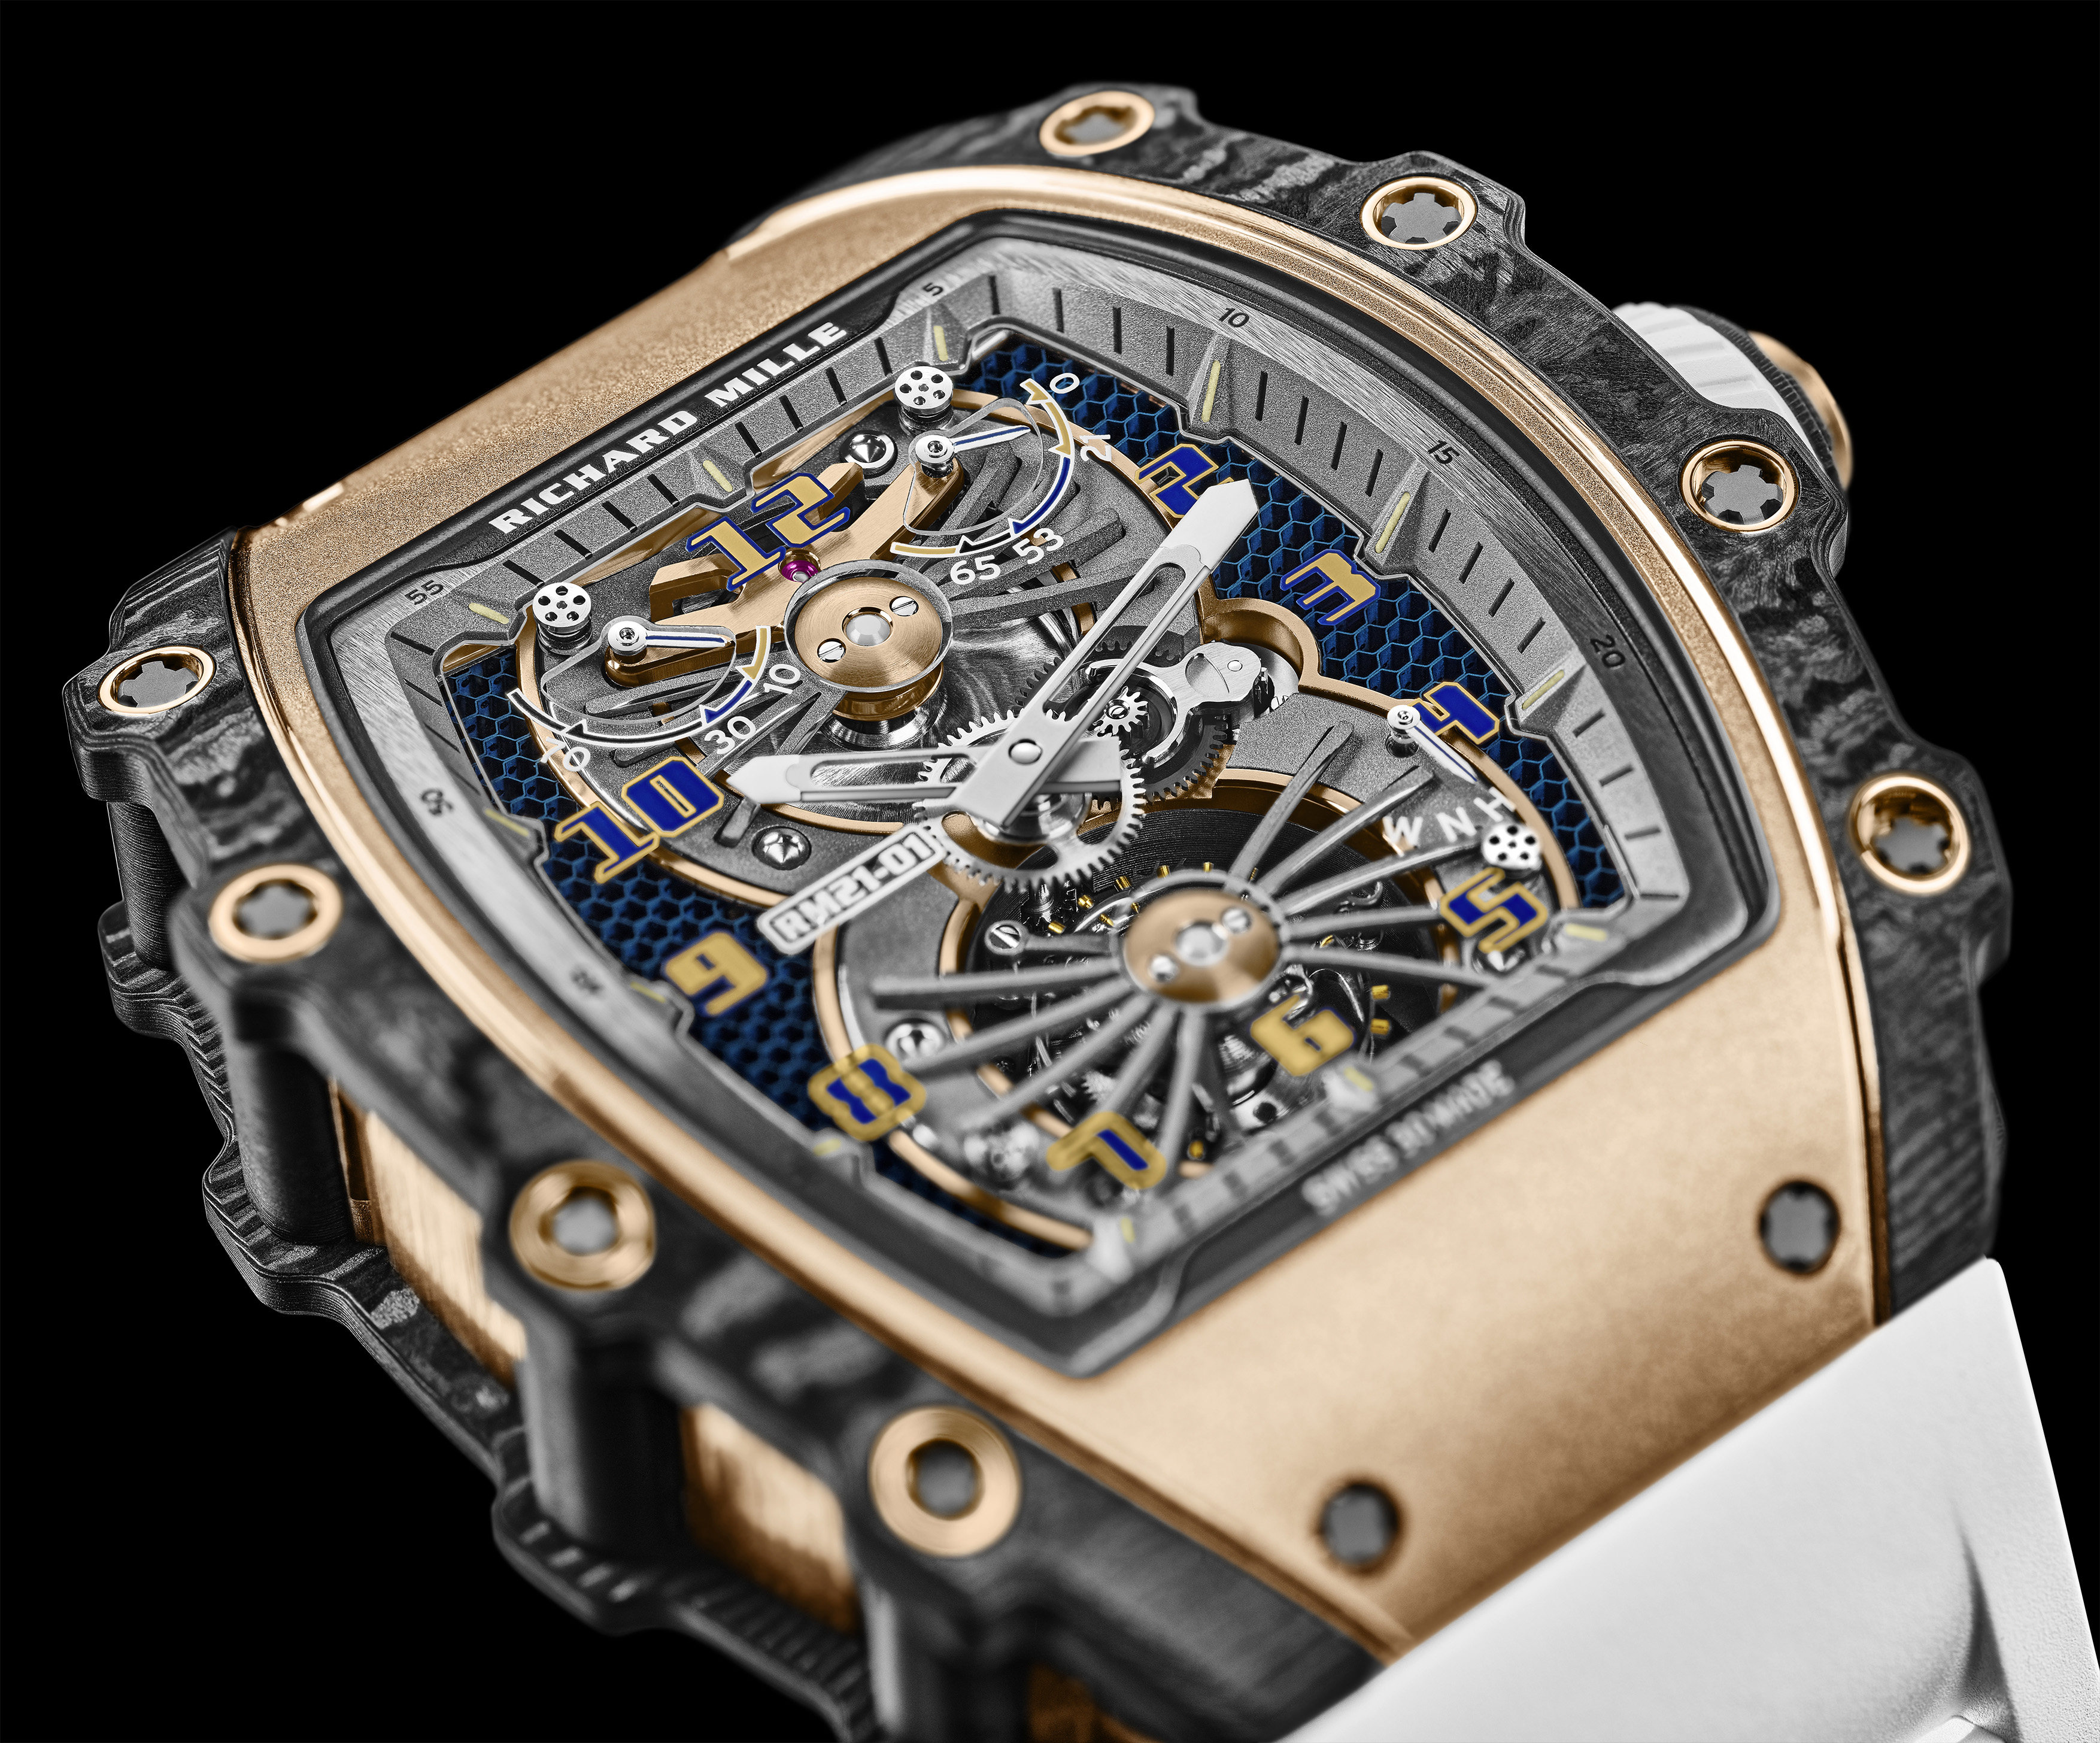 Richard Mille’s RM 21-01 Tourbillon Aerodyne features the watchmaker’s first use of Haynes 214, a highly heat-resistant alloy that’s presented in a honeycomb structure on the baseplate. Photo: Richard Mille